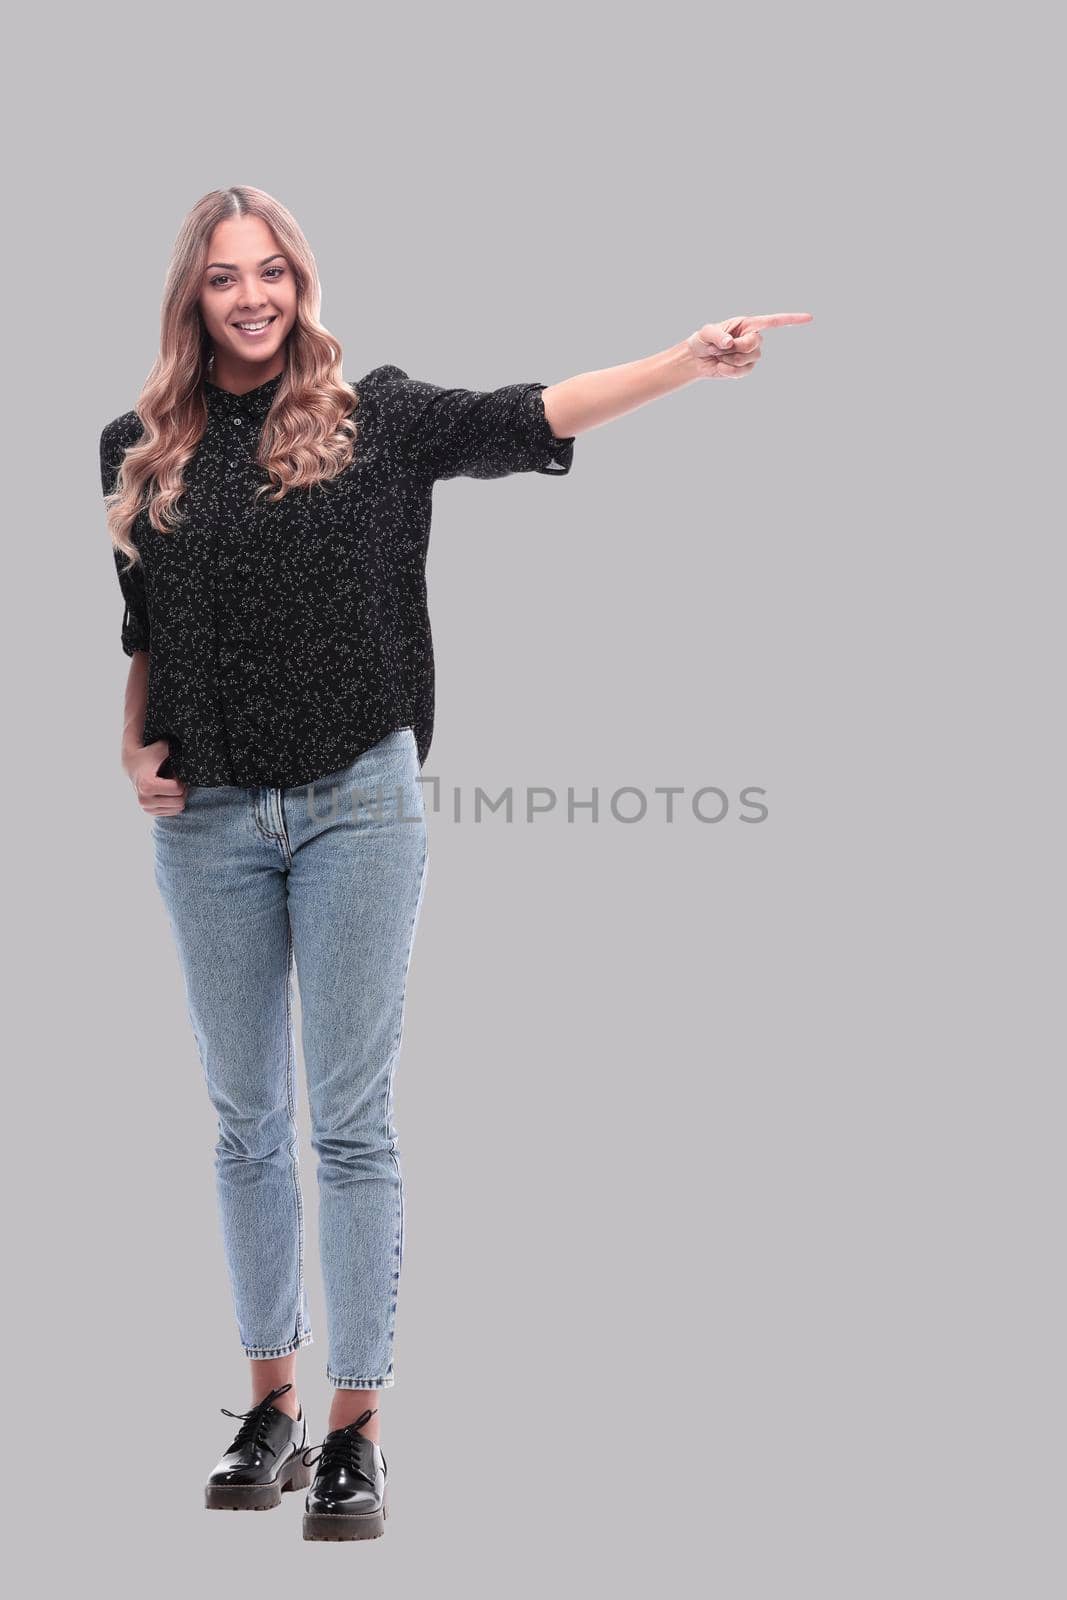 in full growth. attractive young woman pointing to copy space by asdf